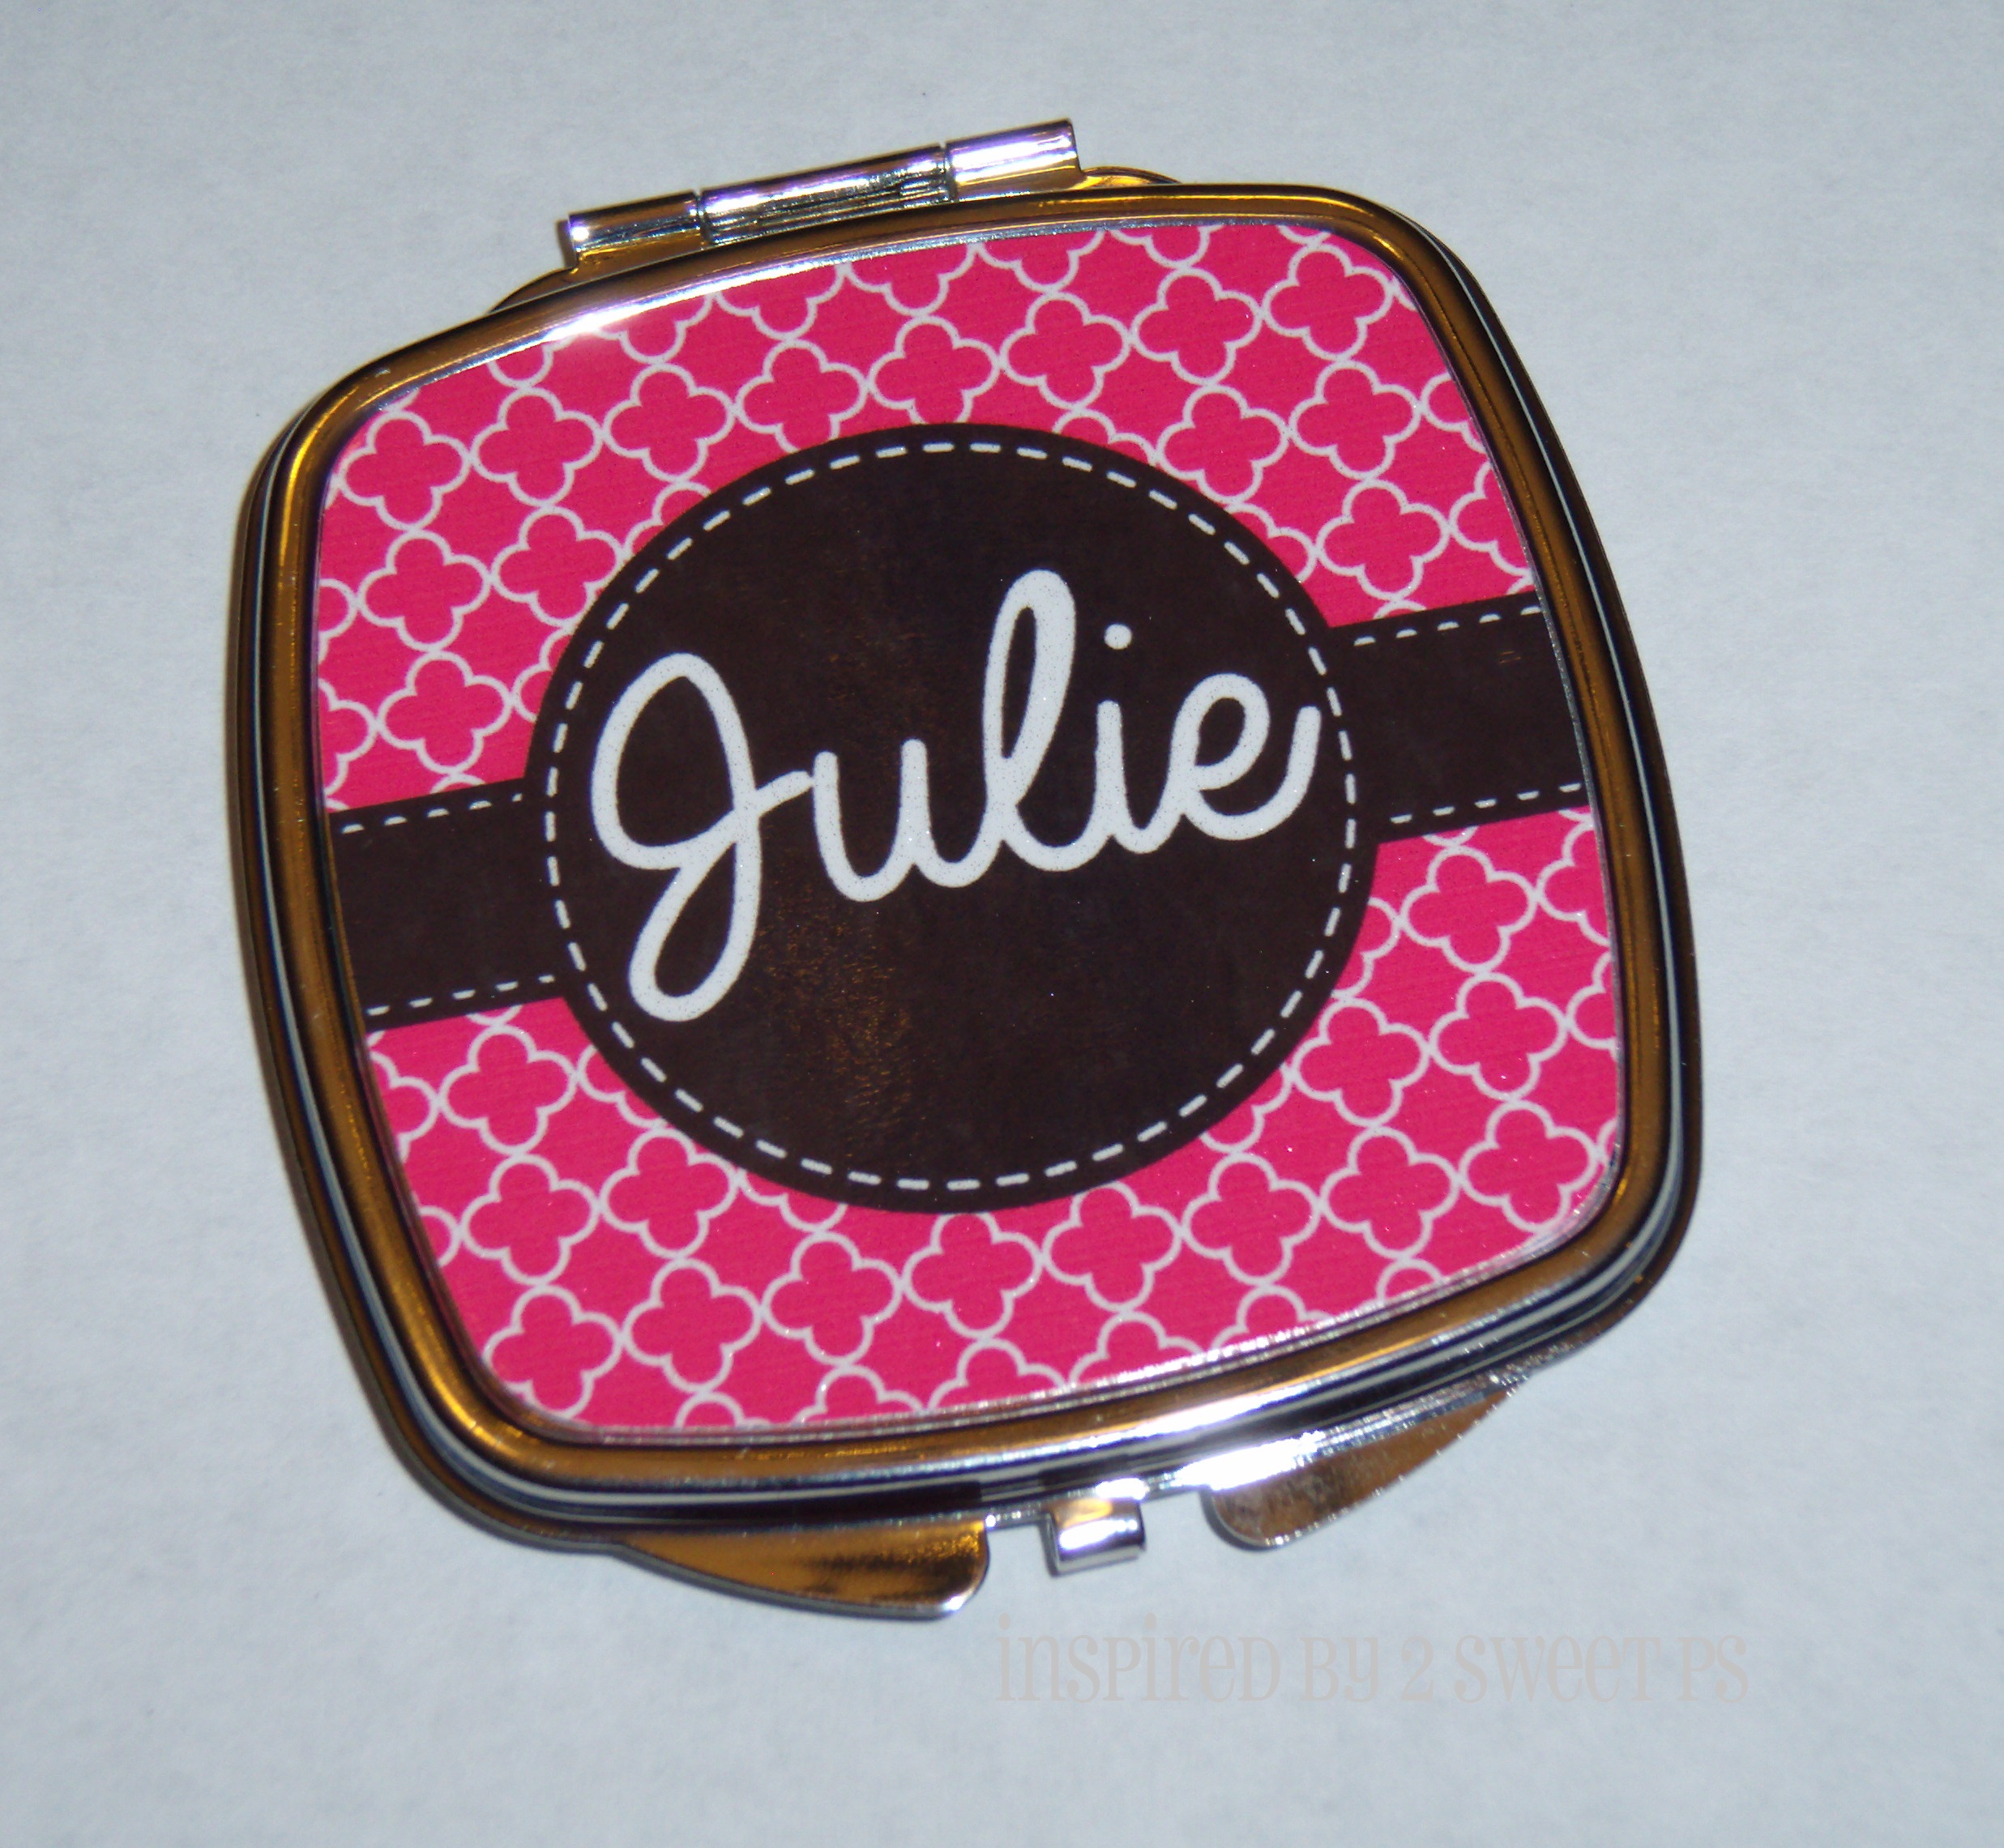 COMPACT MIRROR made with sublimation printing